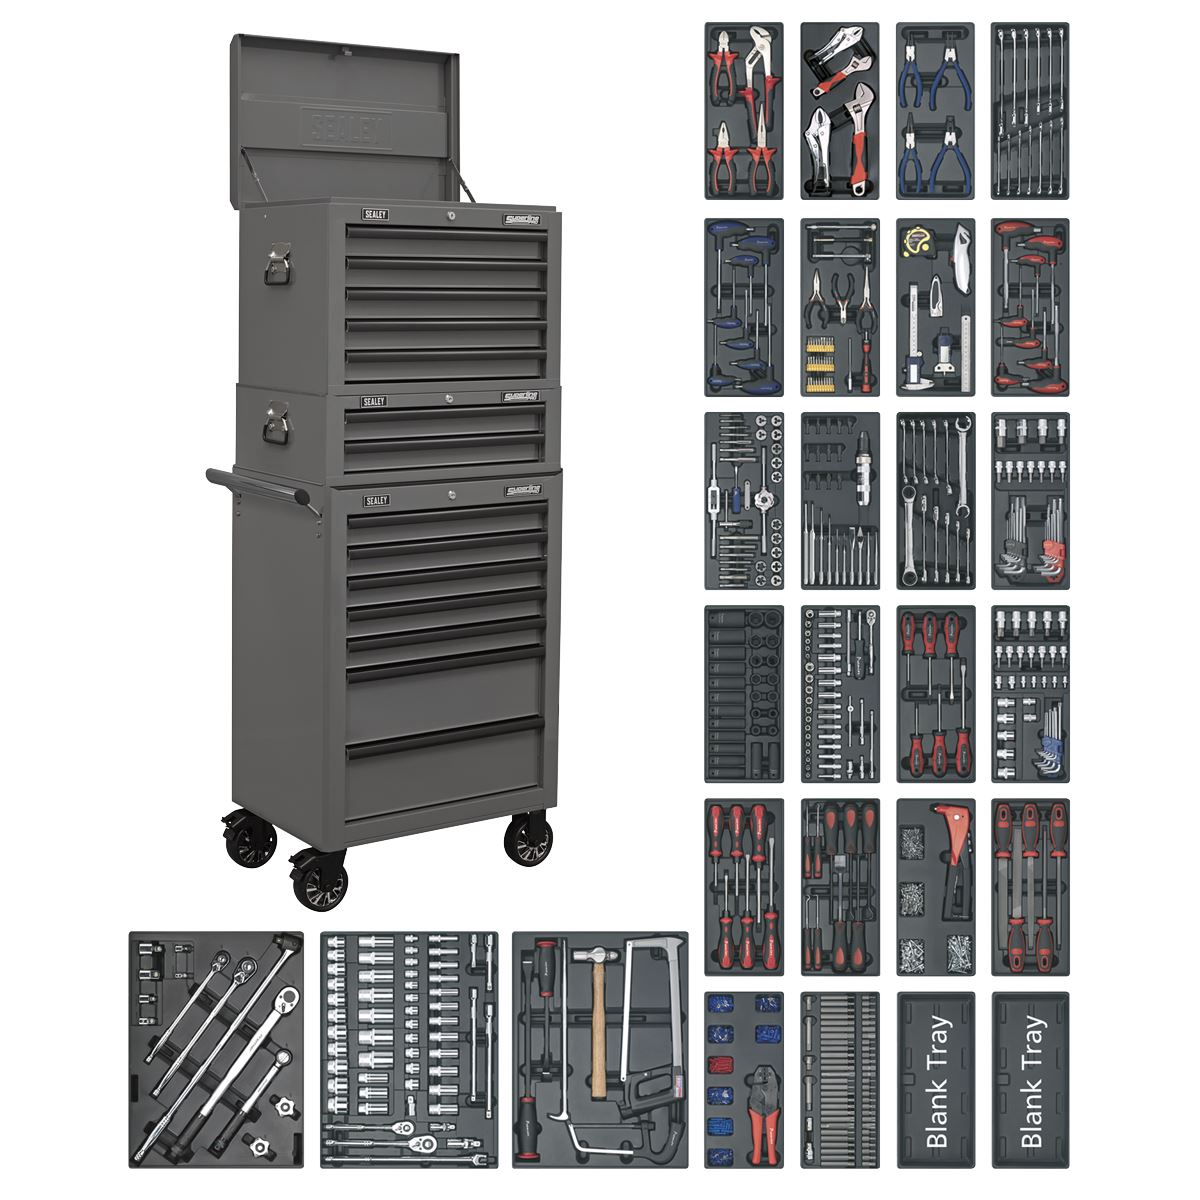 Sealey Superline Pro Tool Chest Combination 14 Drawer with Ball-Bearing Slides - Grey & 1179pc Tool Kit